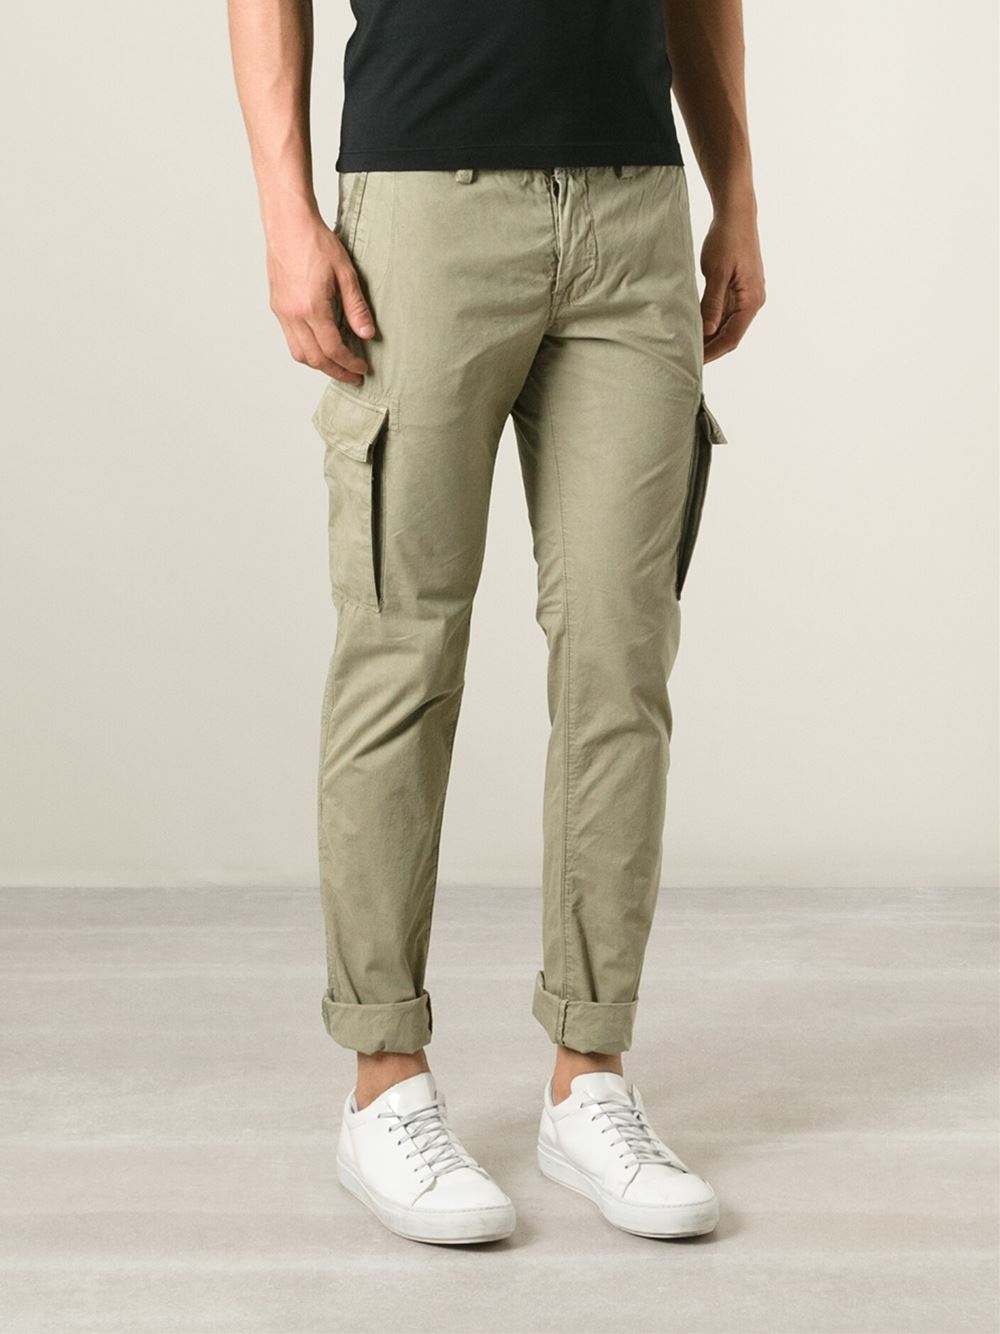 Stone Island Cargo Trousers in Natural for Men - Lyst